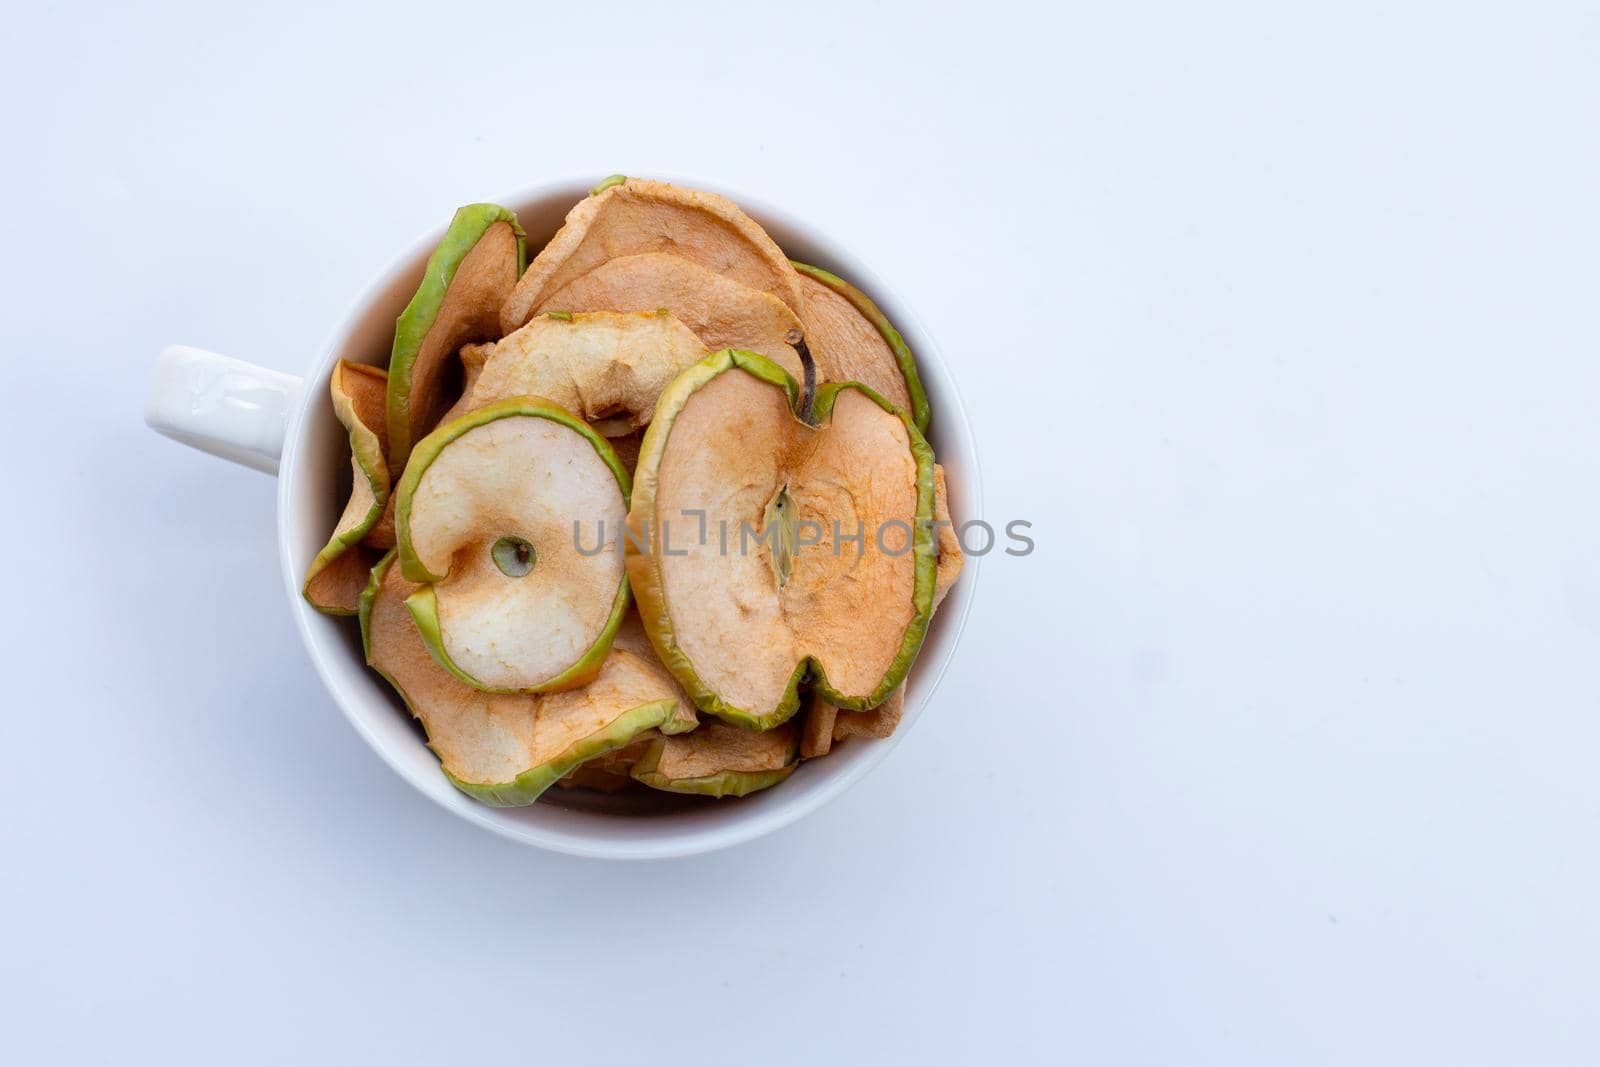 Dried apple slices in white cup on white background by Bowonpat